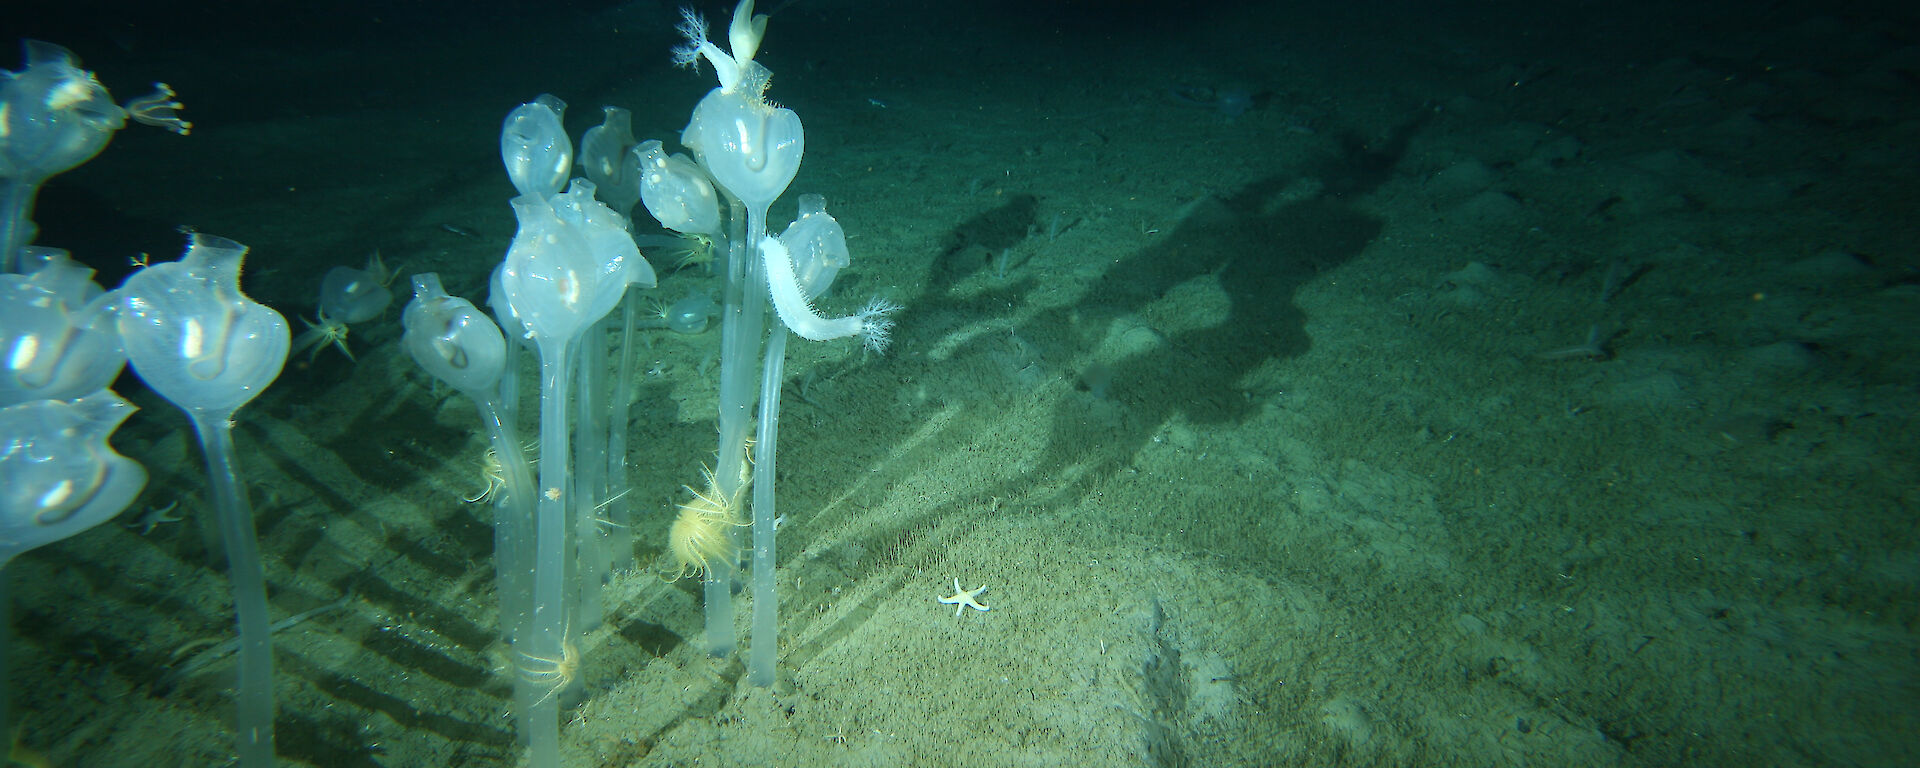 These solitary sea squirts, standing half a metre high on the seafloor, 220m below the surface, were photographed in Antarctic waters during the Census of Antarctic Marine Life.